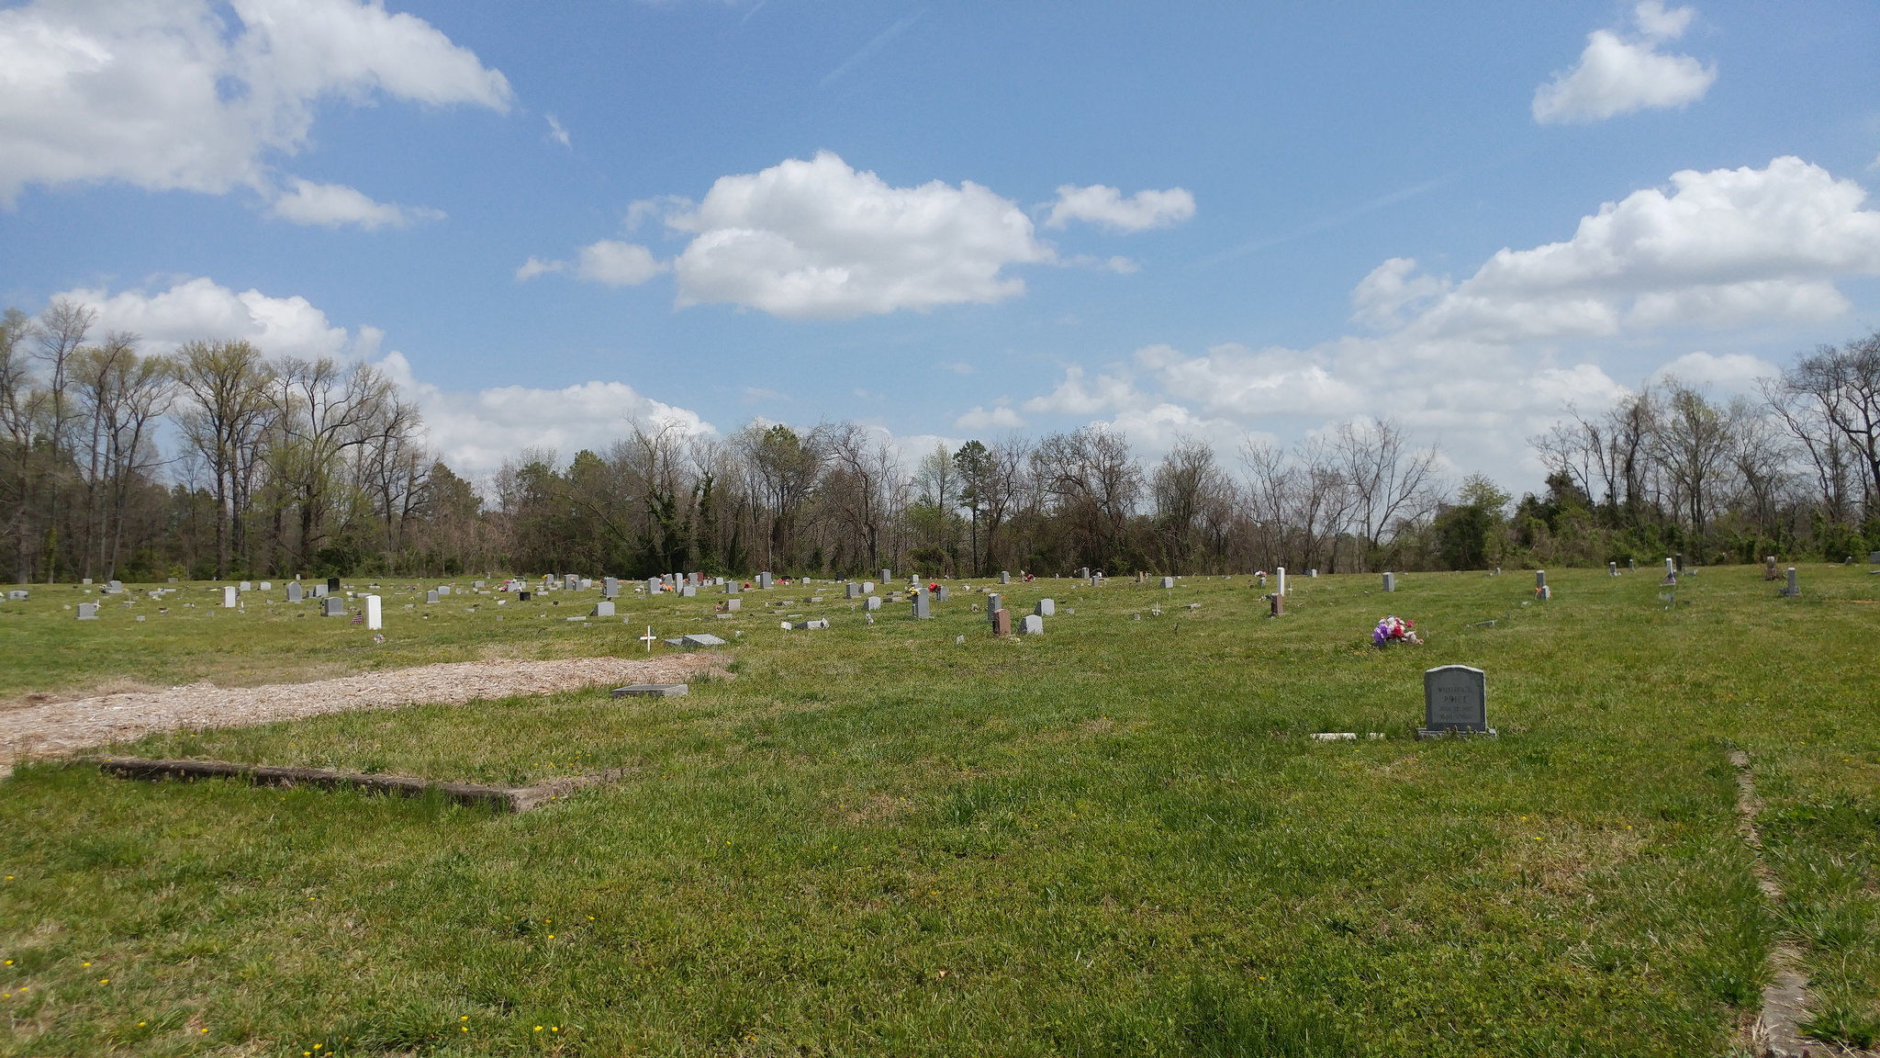 Evergreen Cemetery in April. (Photo credit: George Copeland Jr.)